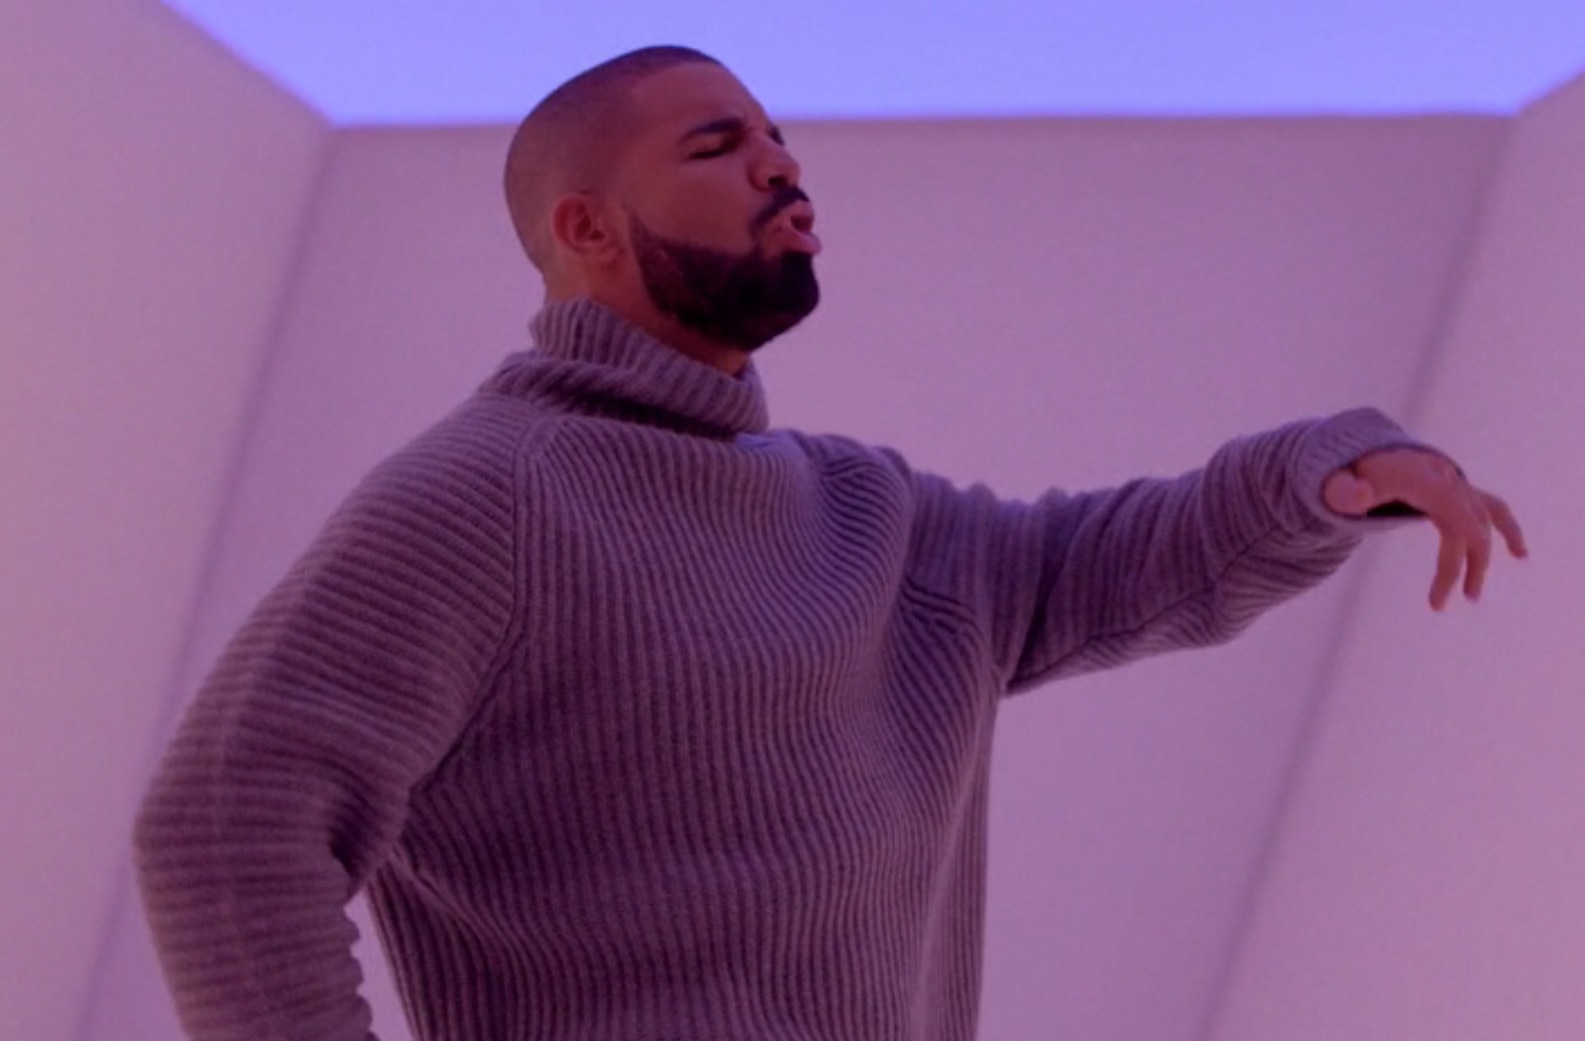 Hotline Bling Video Released, In Which Drake Dances For The 